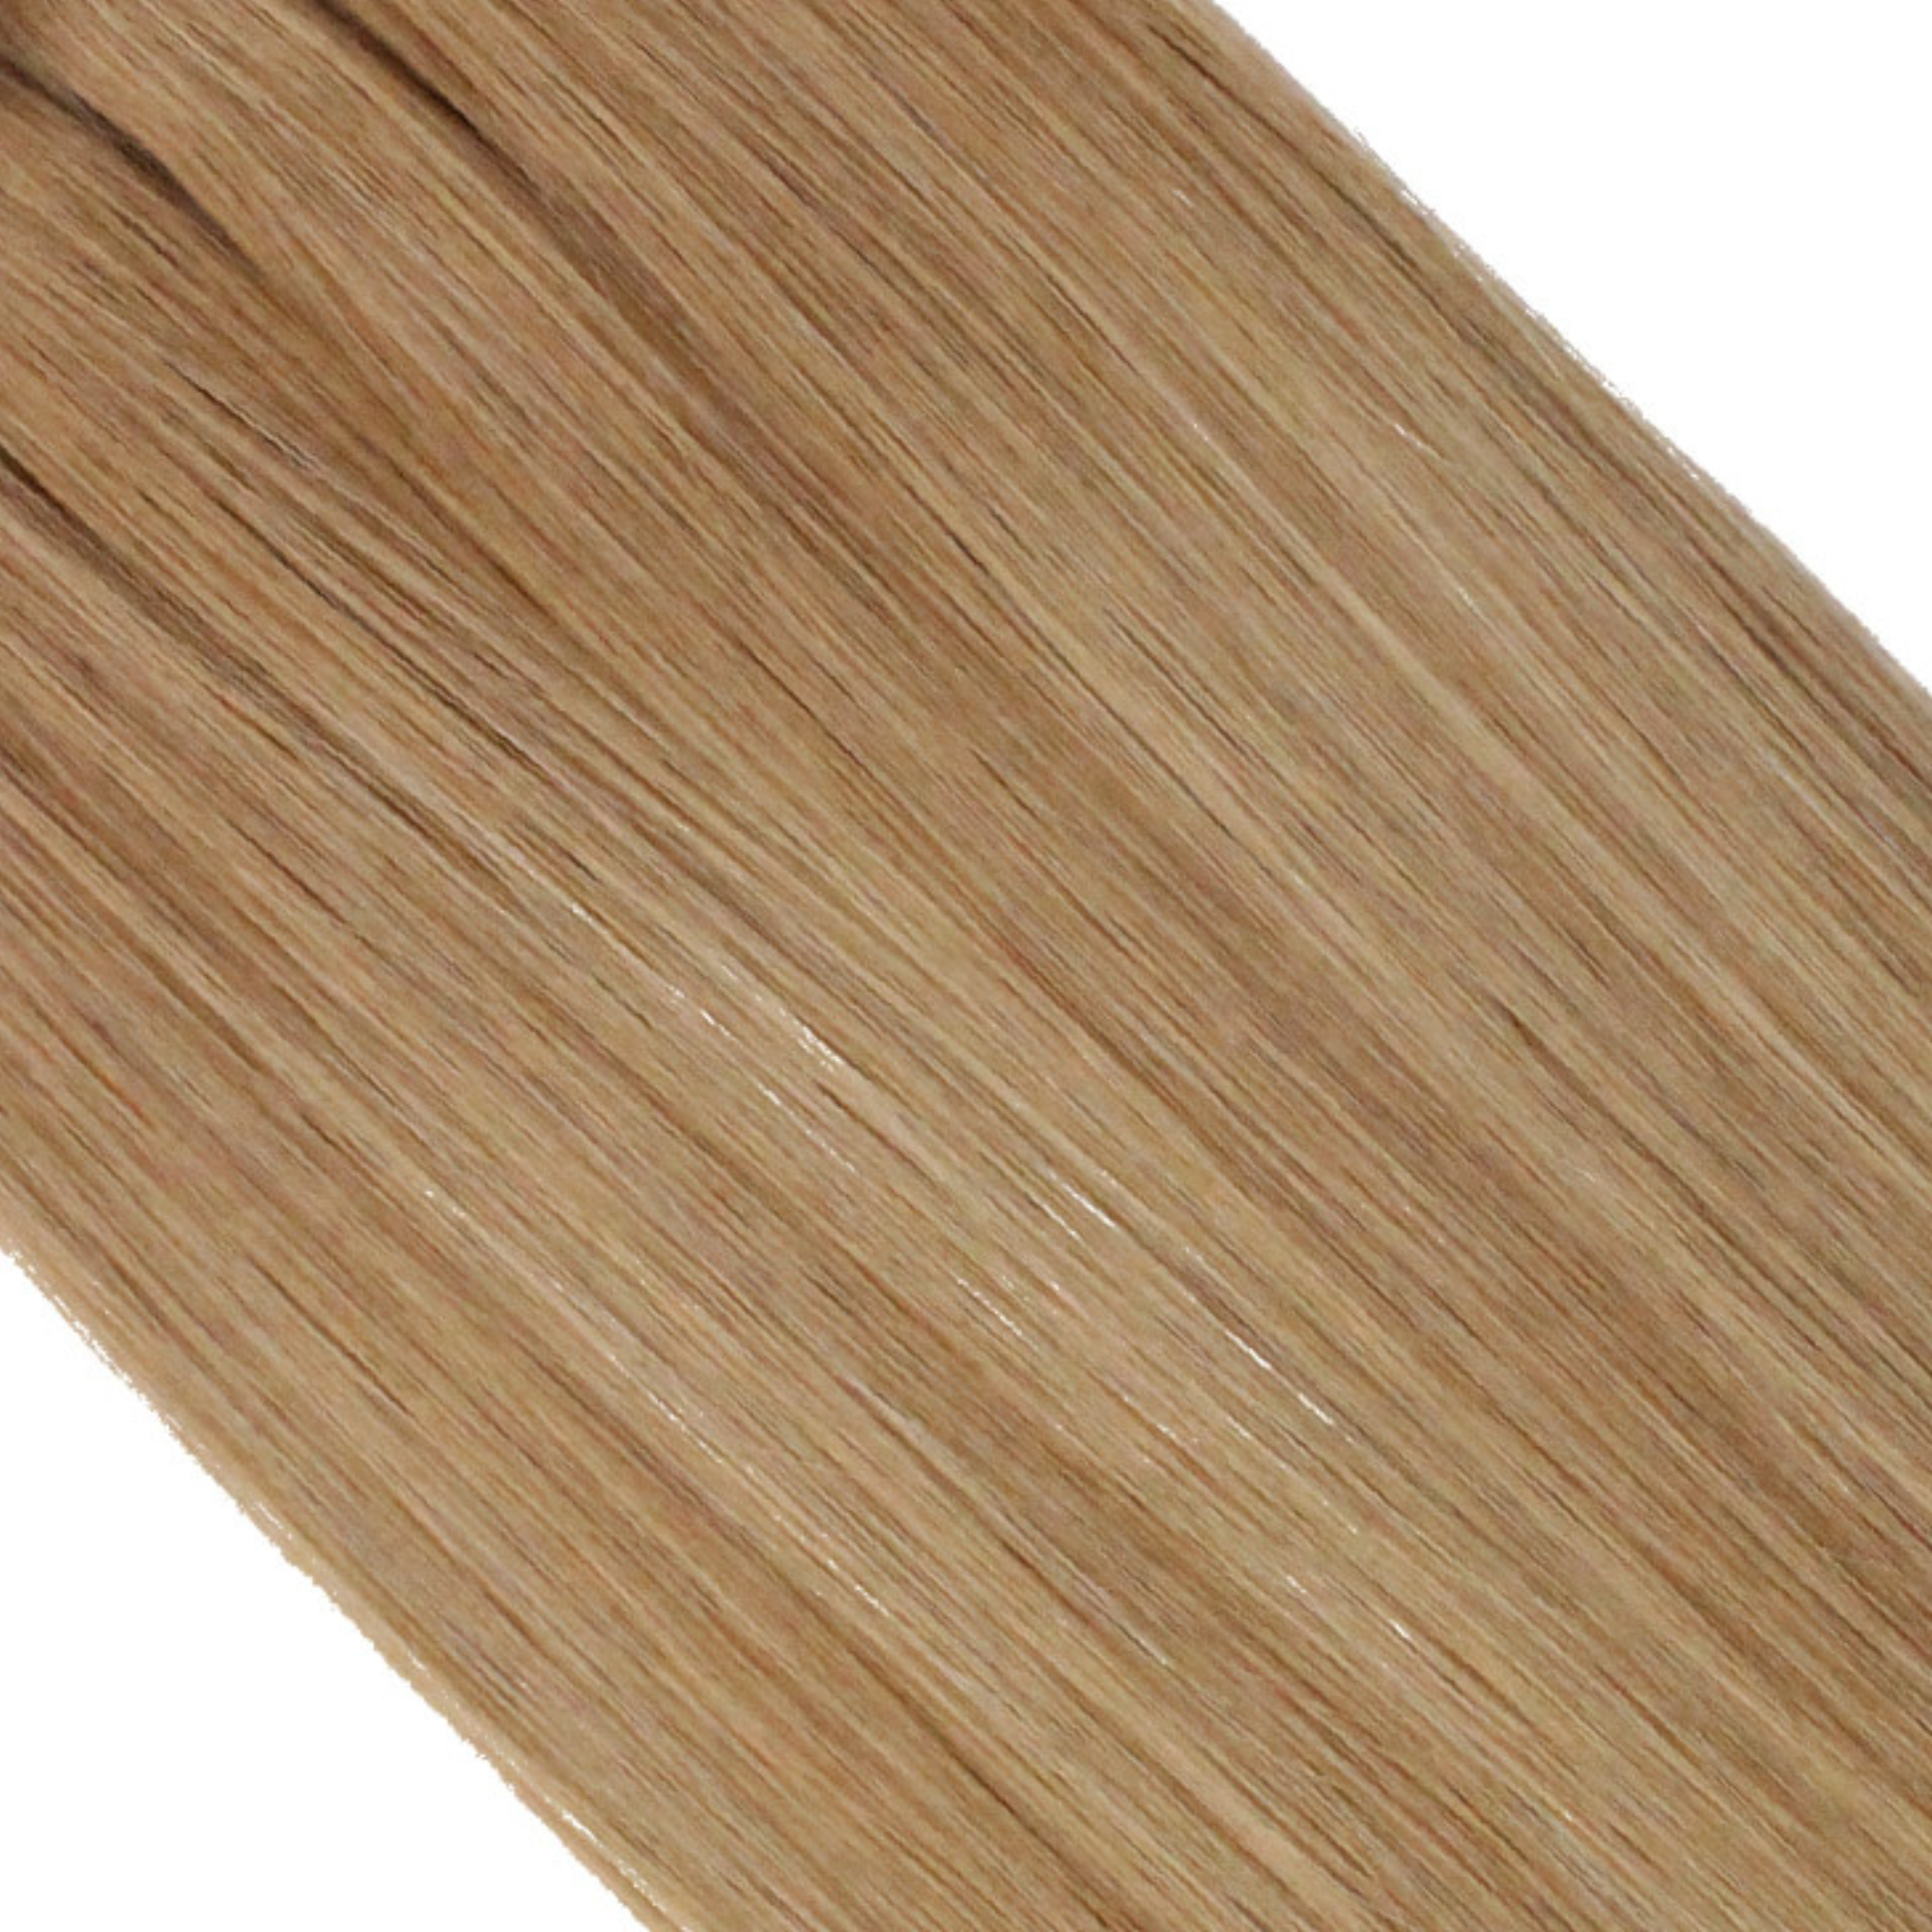 "hair rehab london 18" weft hair extensions shade swatch titled rooted mocha"